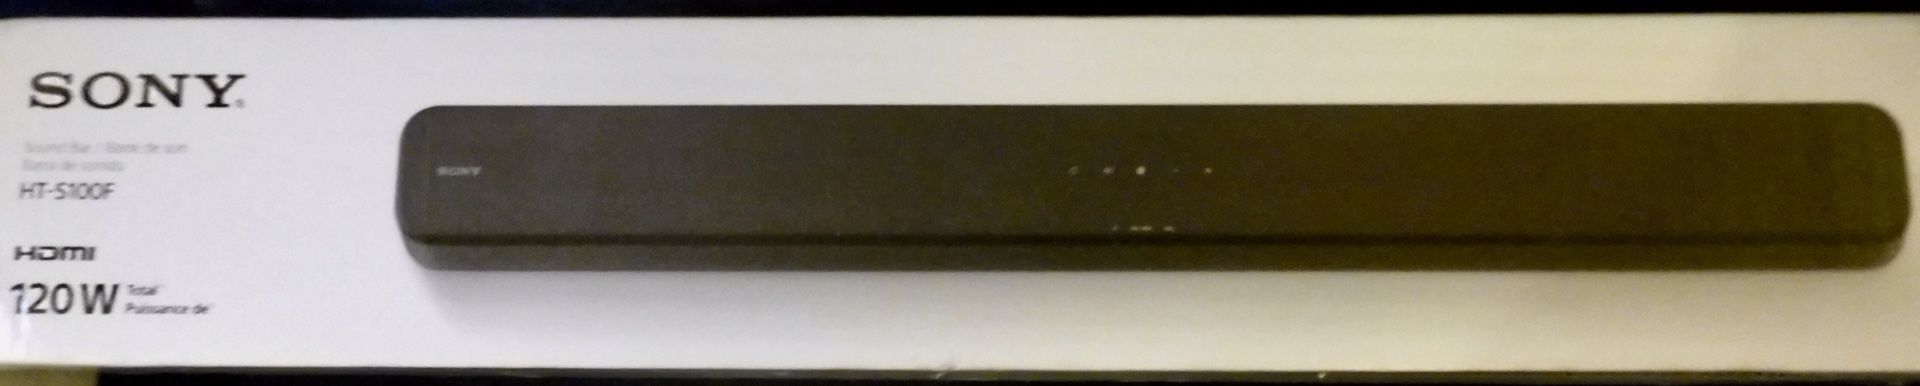 Sony 2.0 channel Sound Bar, HT-S100F, with Integrated Tweeter